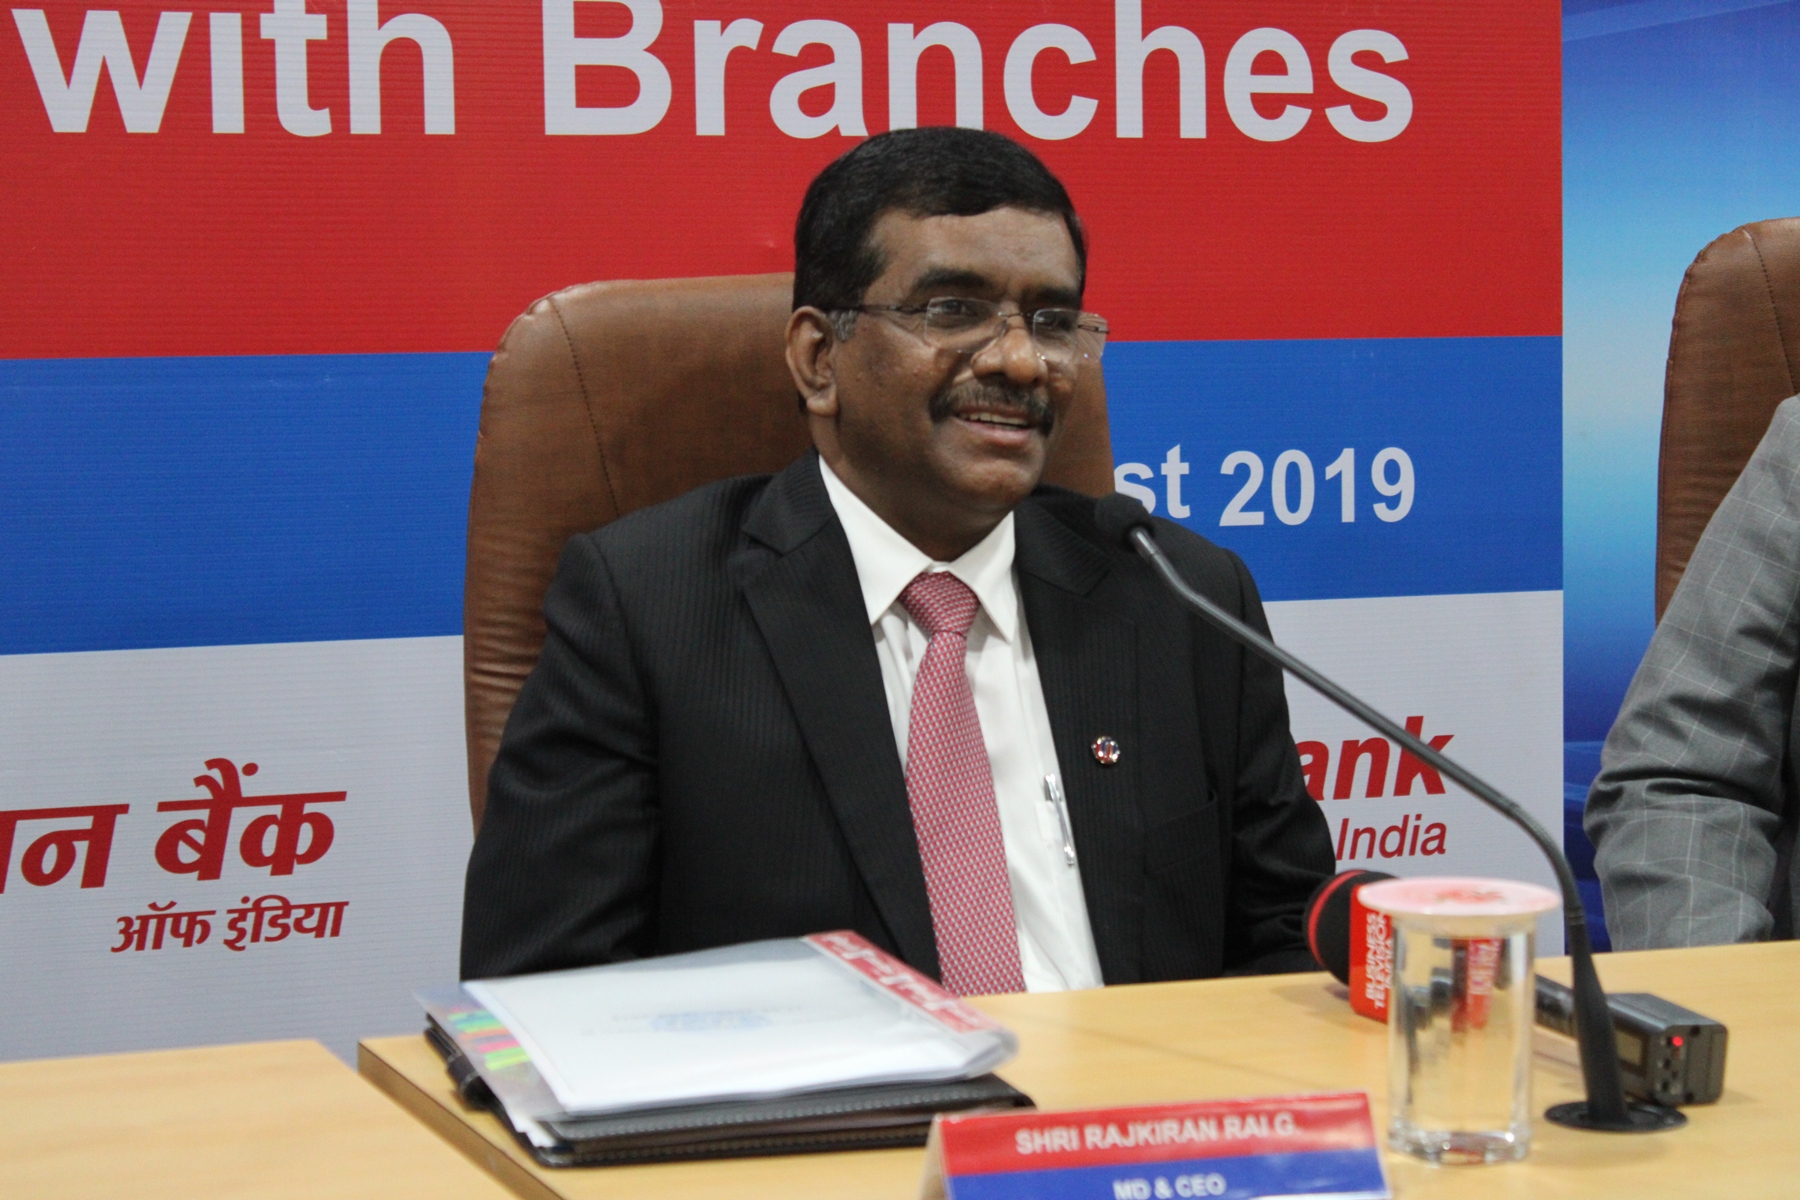 Mr. Rajkiran Rai G, MD & CEO, Union Bank of India (centre) at the collective consultative and ideation process conducted by Union Bank of India comprising meeting of all Branch Heads on 17th & 18th August 2019. The Regional Office Mumbai (West) meeting of all branch heads was held at the Union Bank of India Powai DIT Building on Sunday, 18th August 2019. 